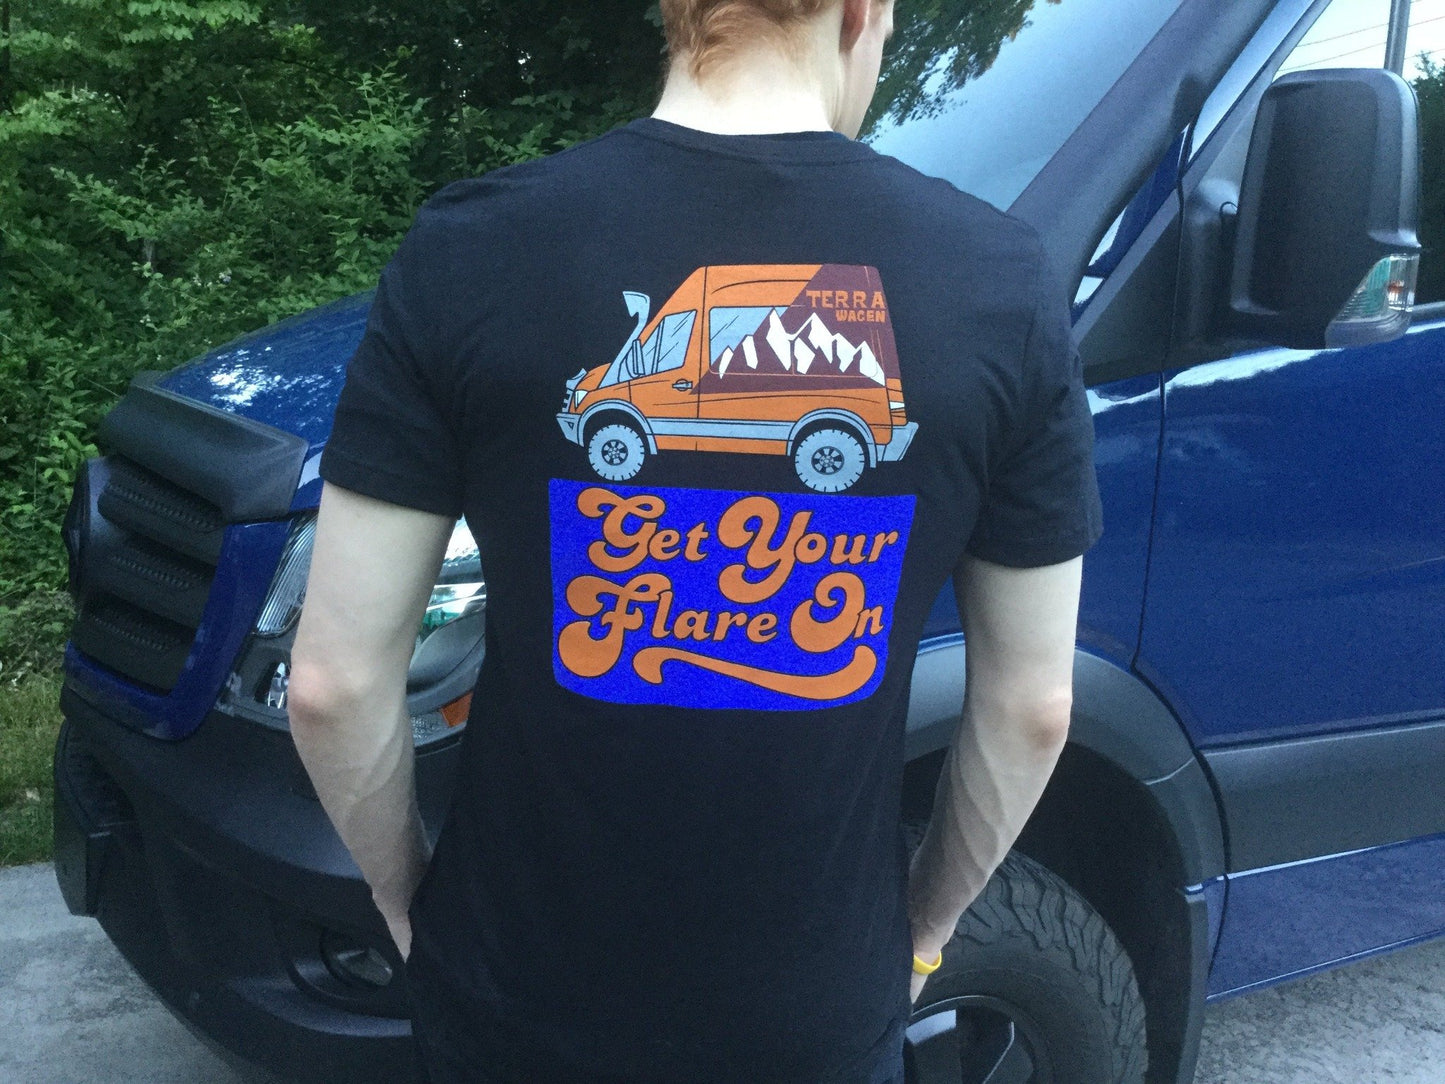 Terrawagen-T-Shirt „Get your Flare on“.